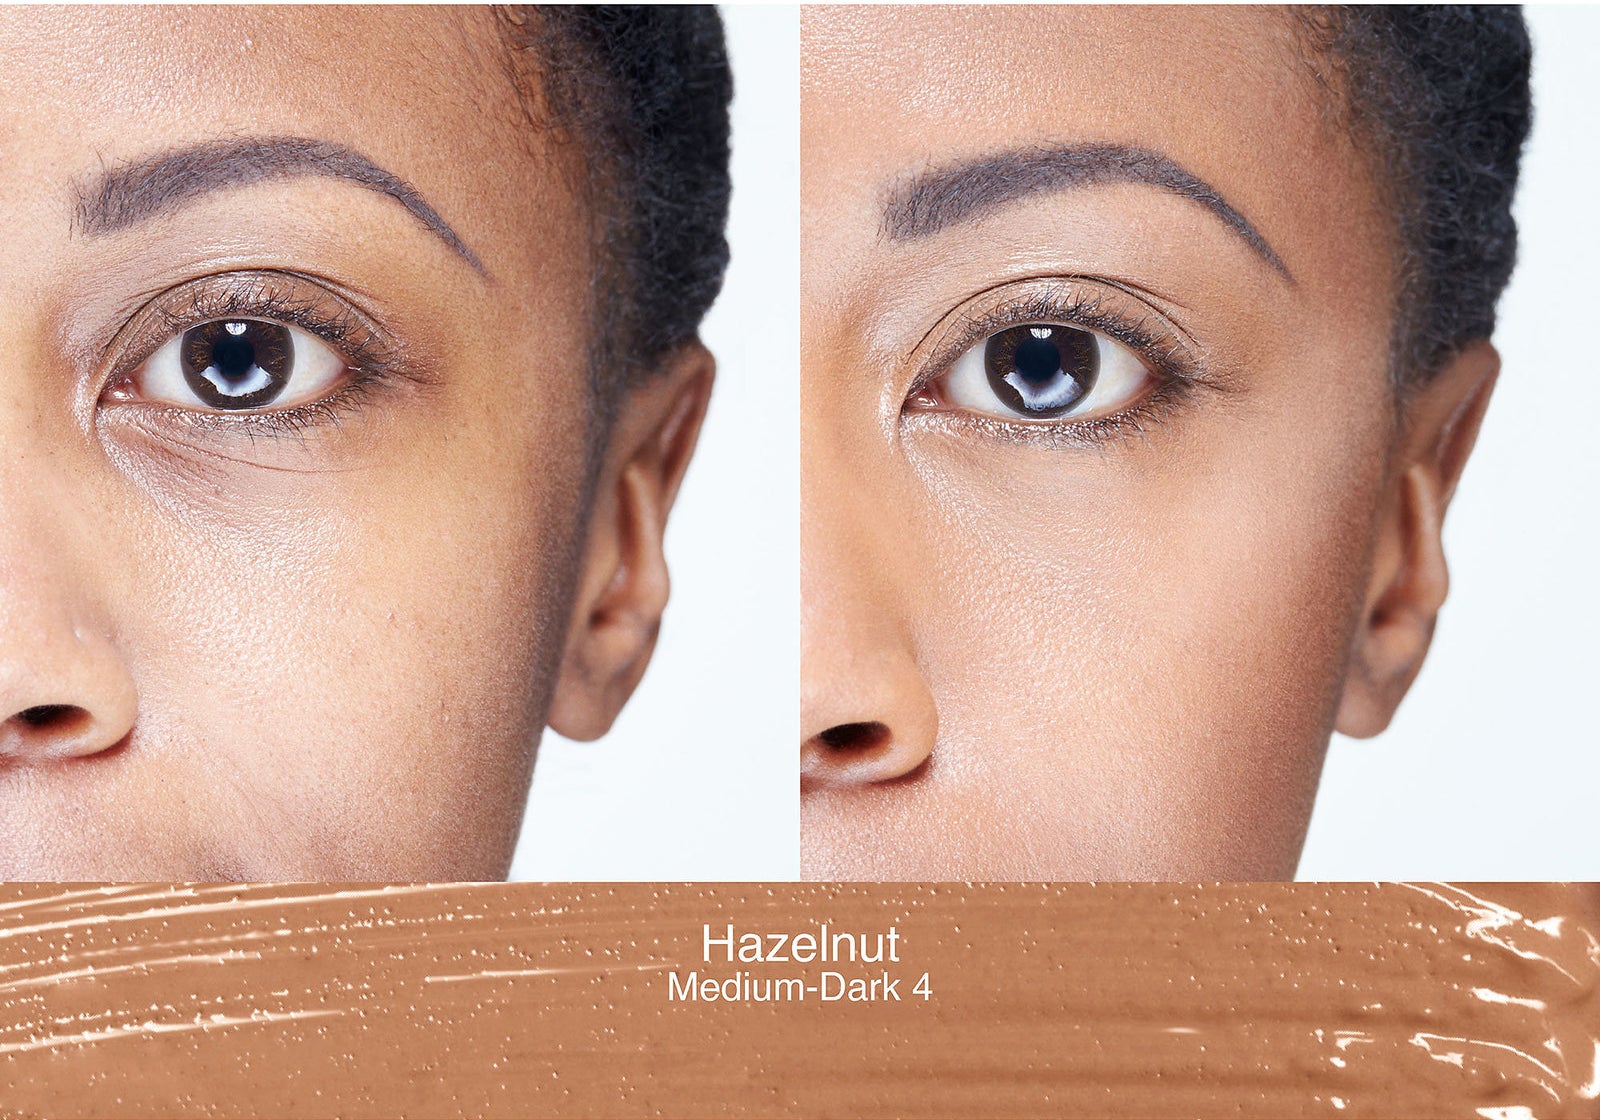 A model, before and after to show the difference in their brightened under eye circles using shade hazelnut